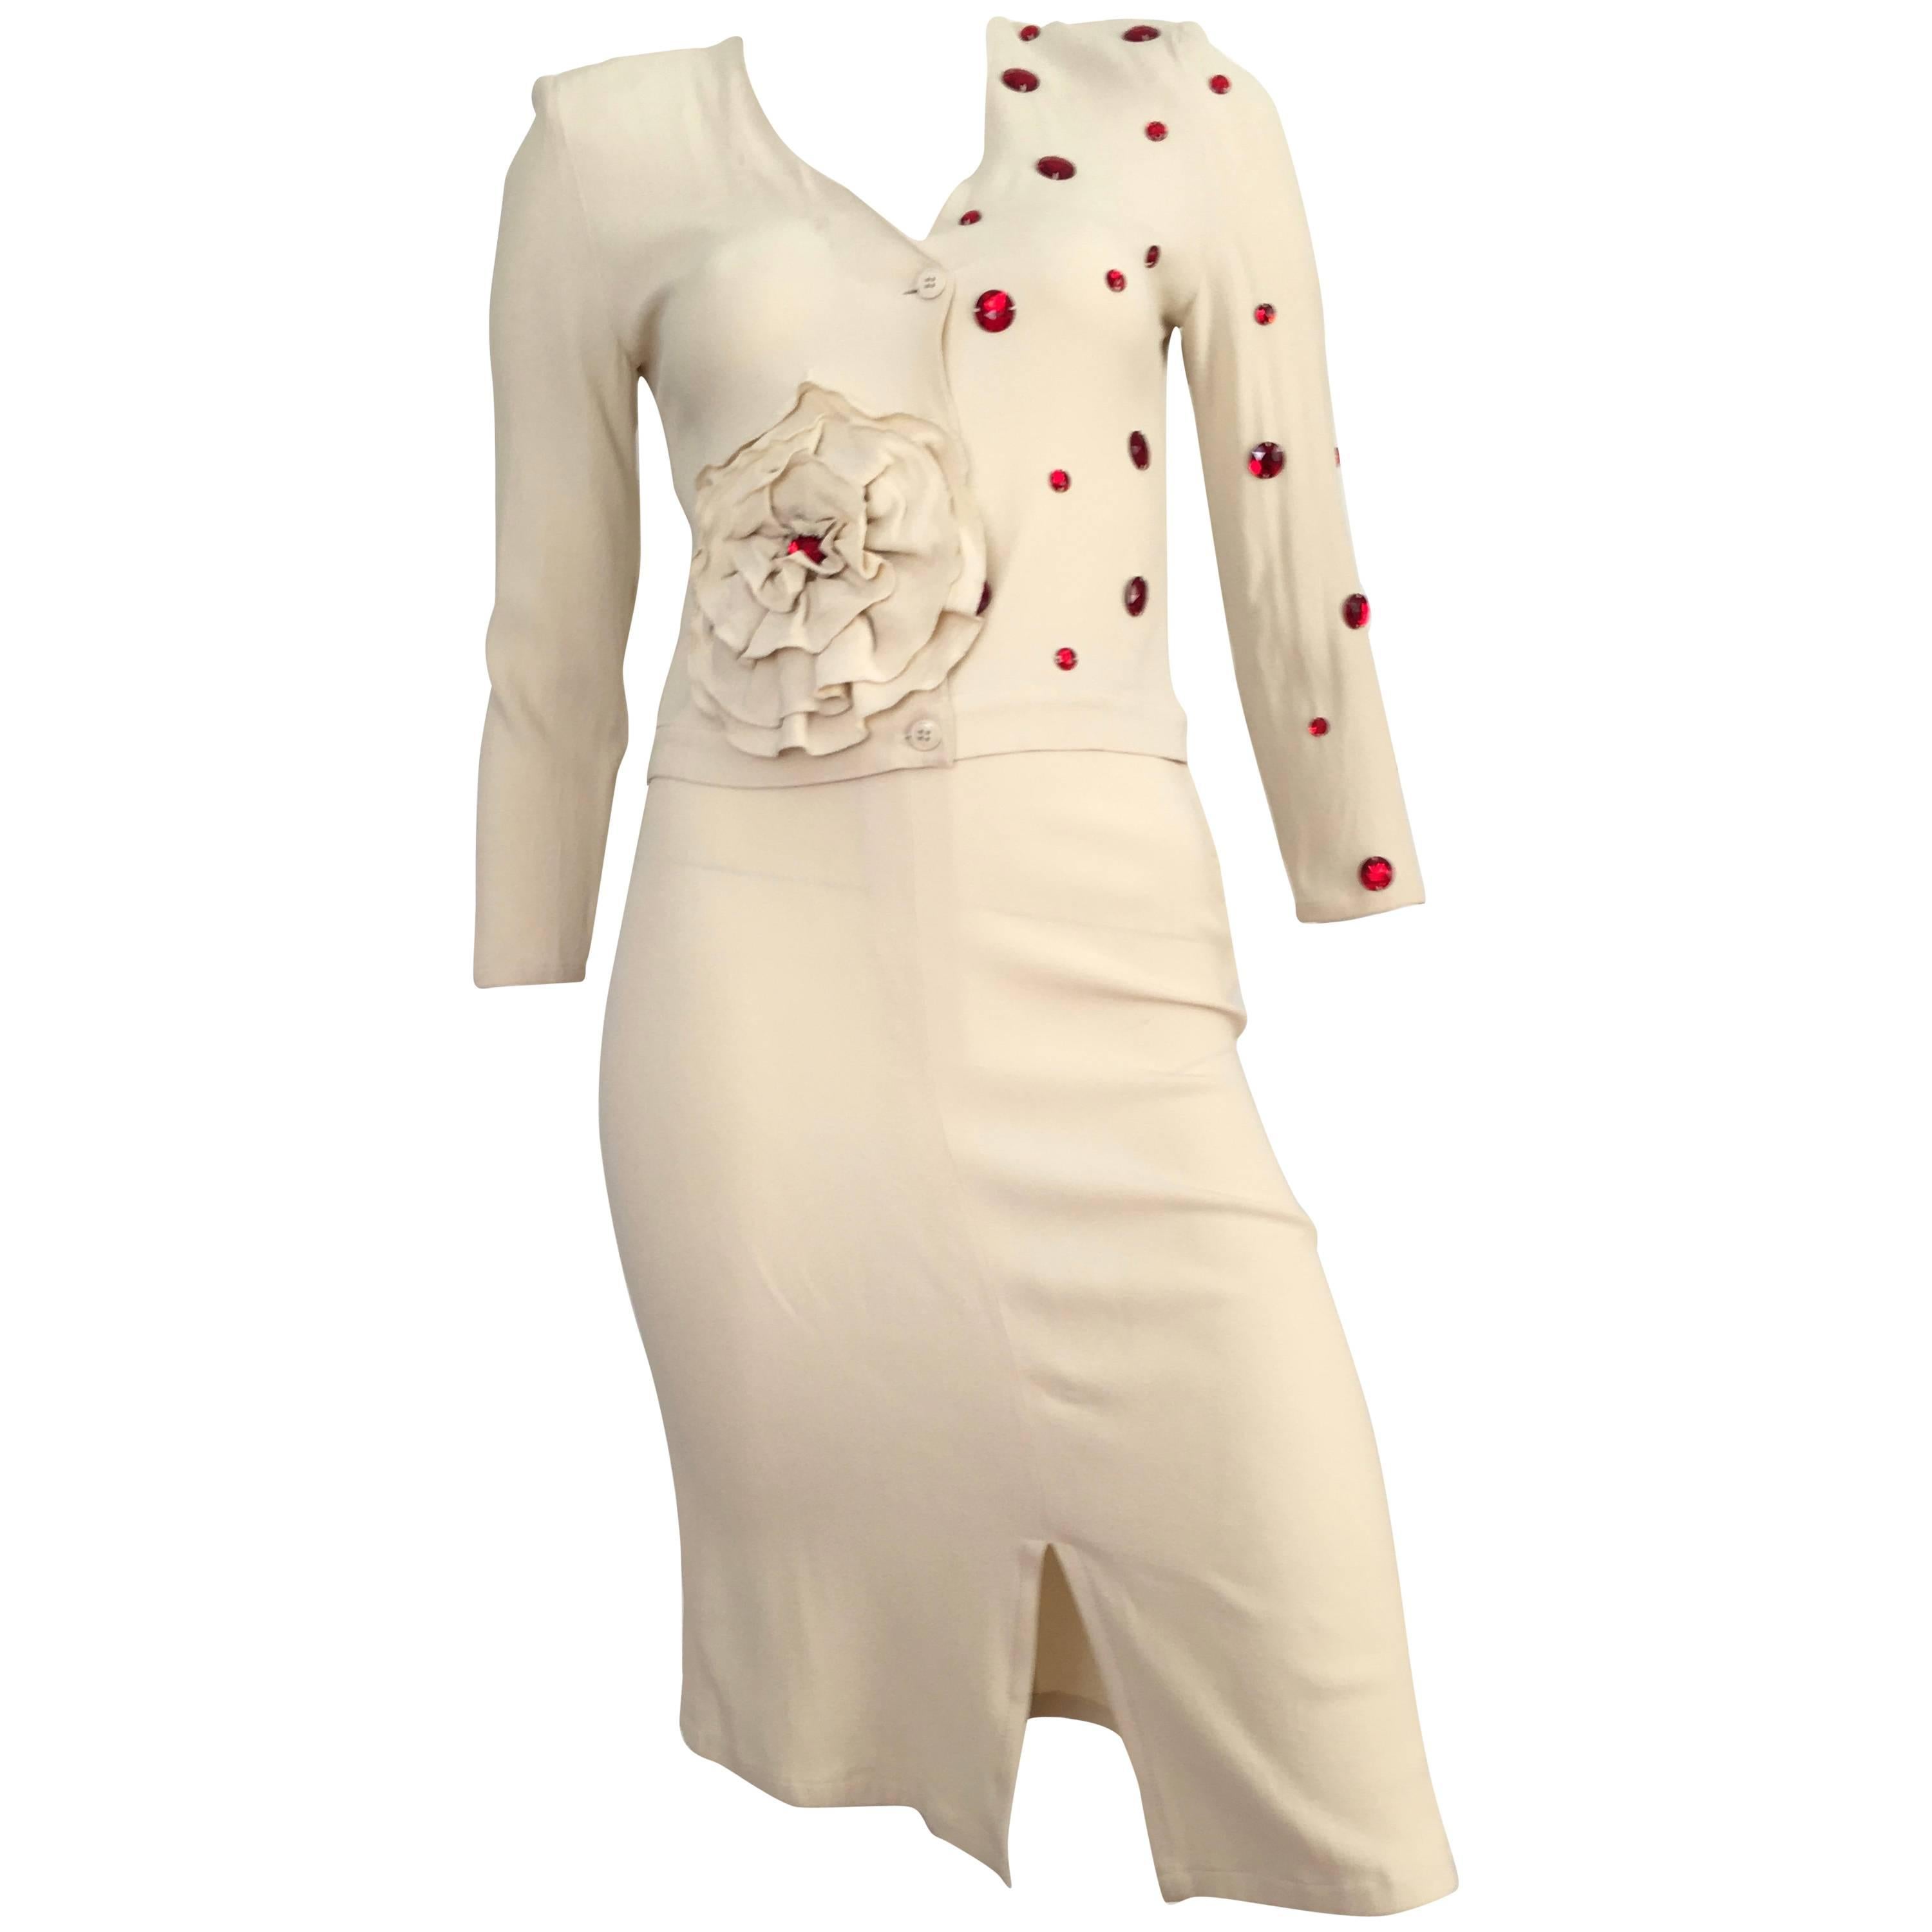 Sonia Rykiel 1980s Cream Skirt Suit with Red Rhinestones Size 4.  For Sale